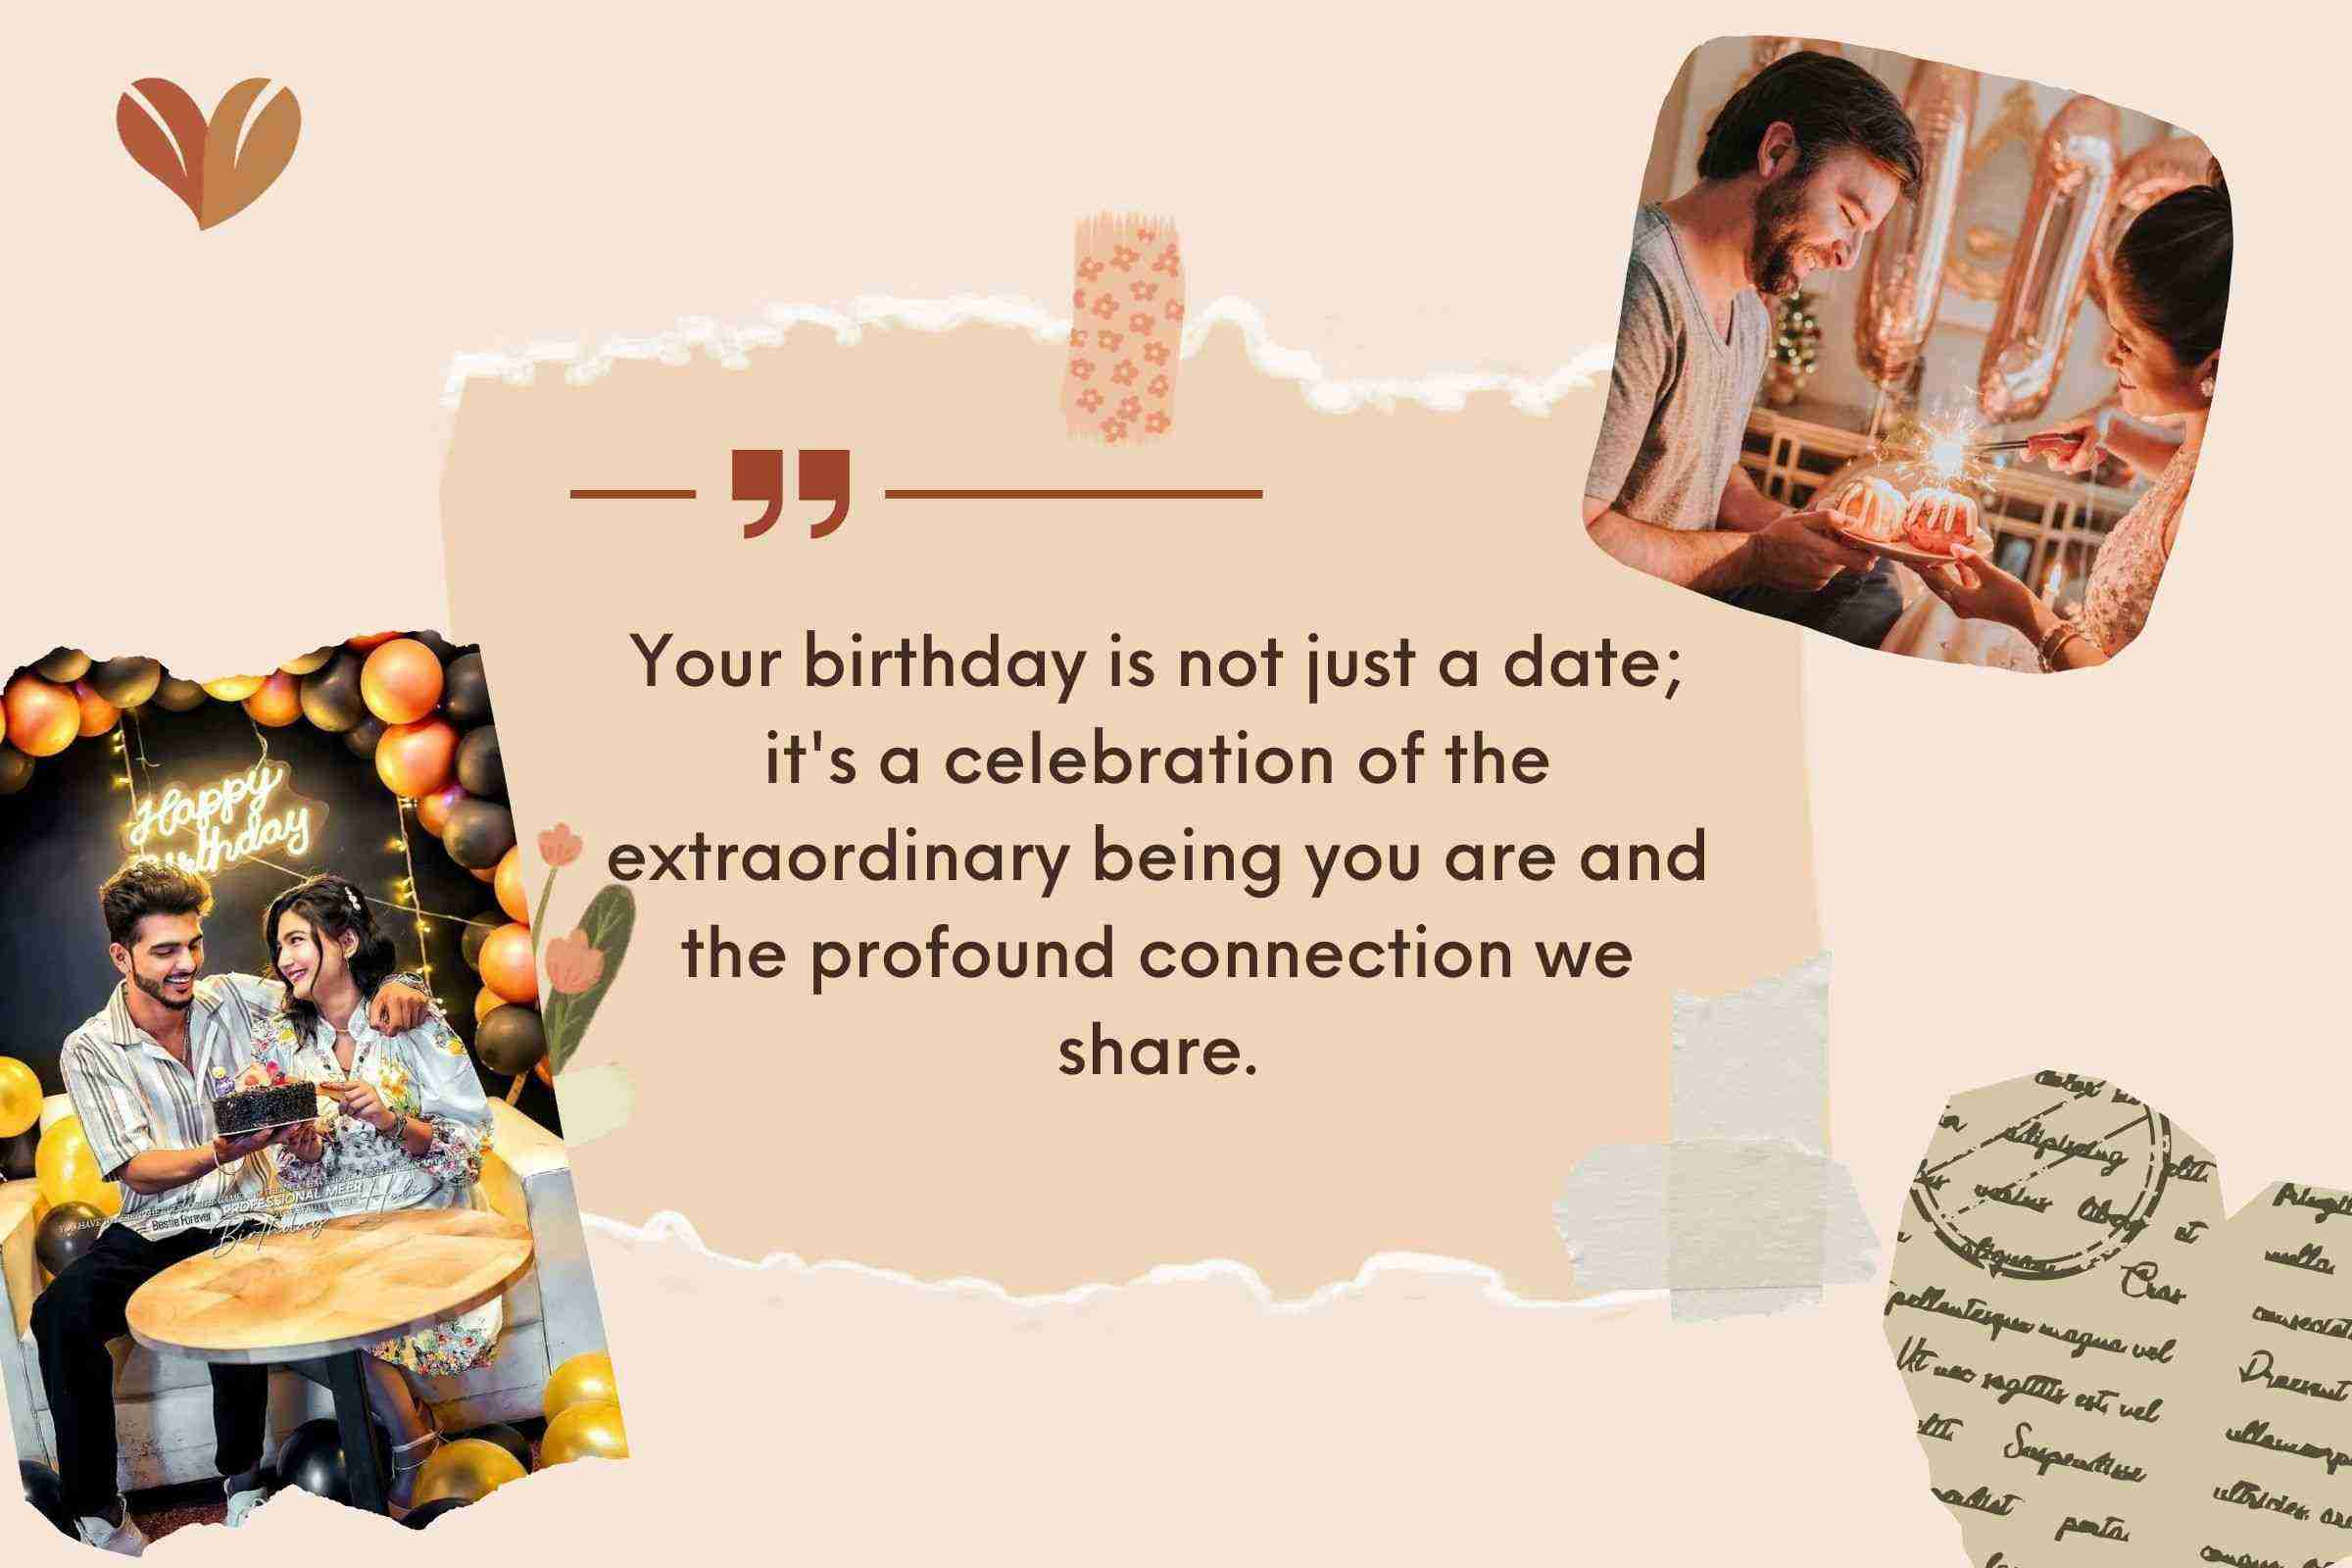 Your birthday is not just a date; it's a celebration of the extraordinary being you are and the profound connection we share.